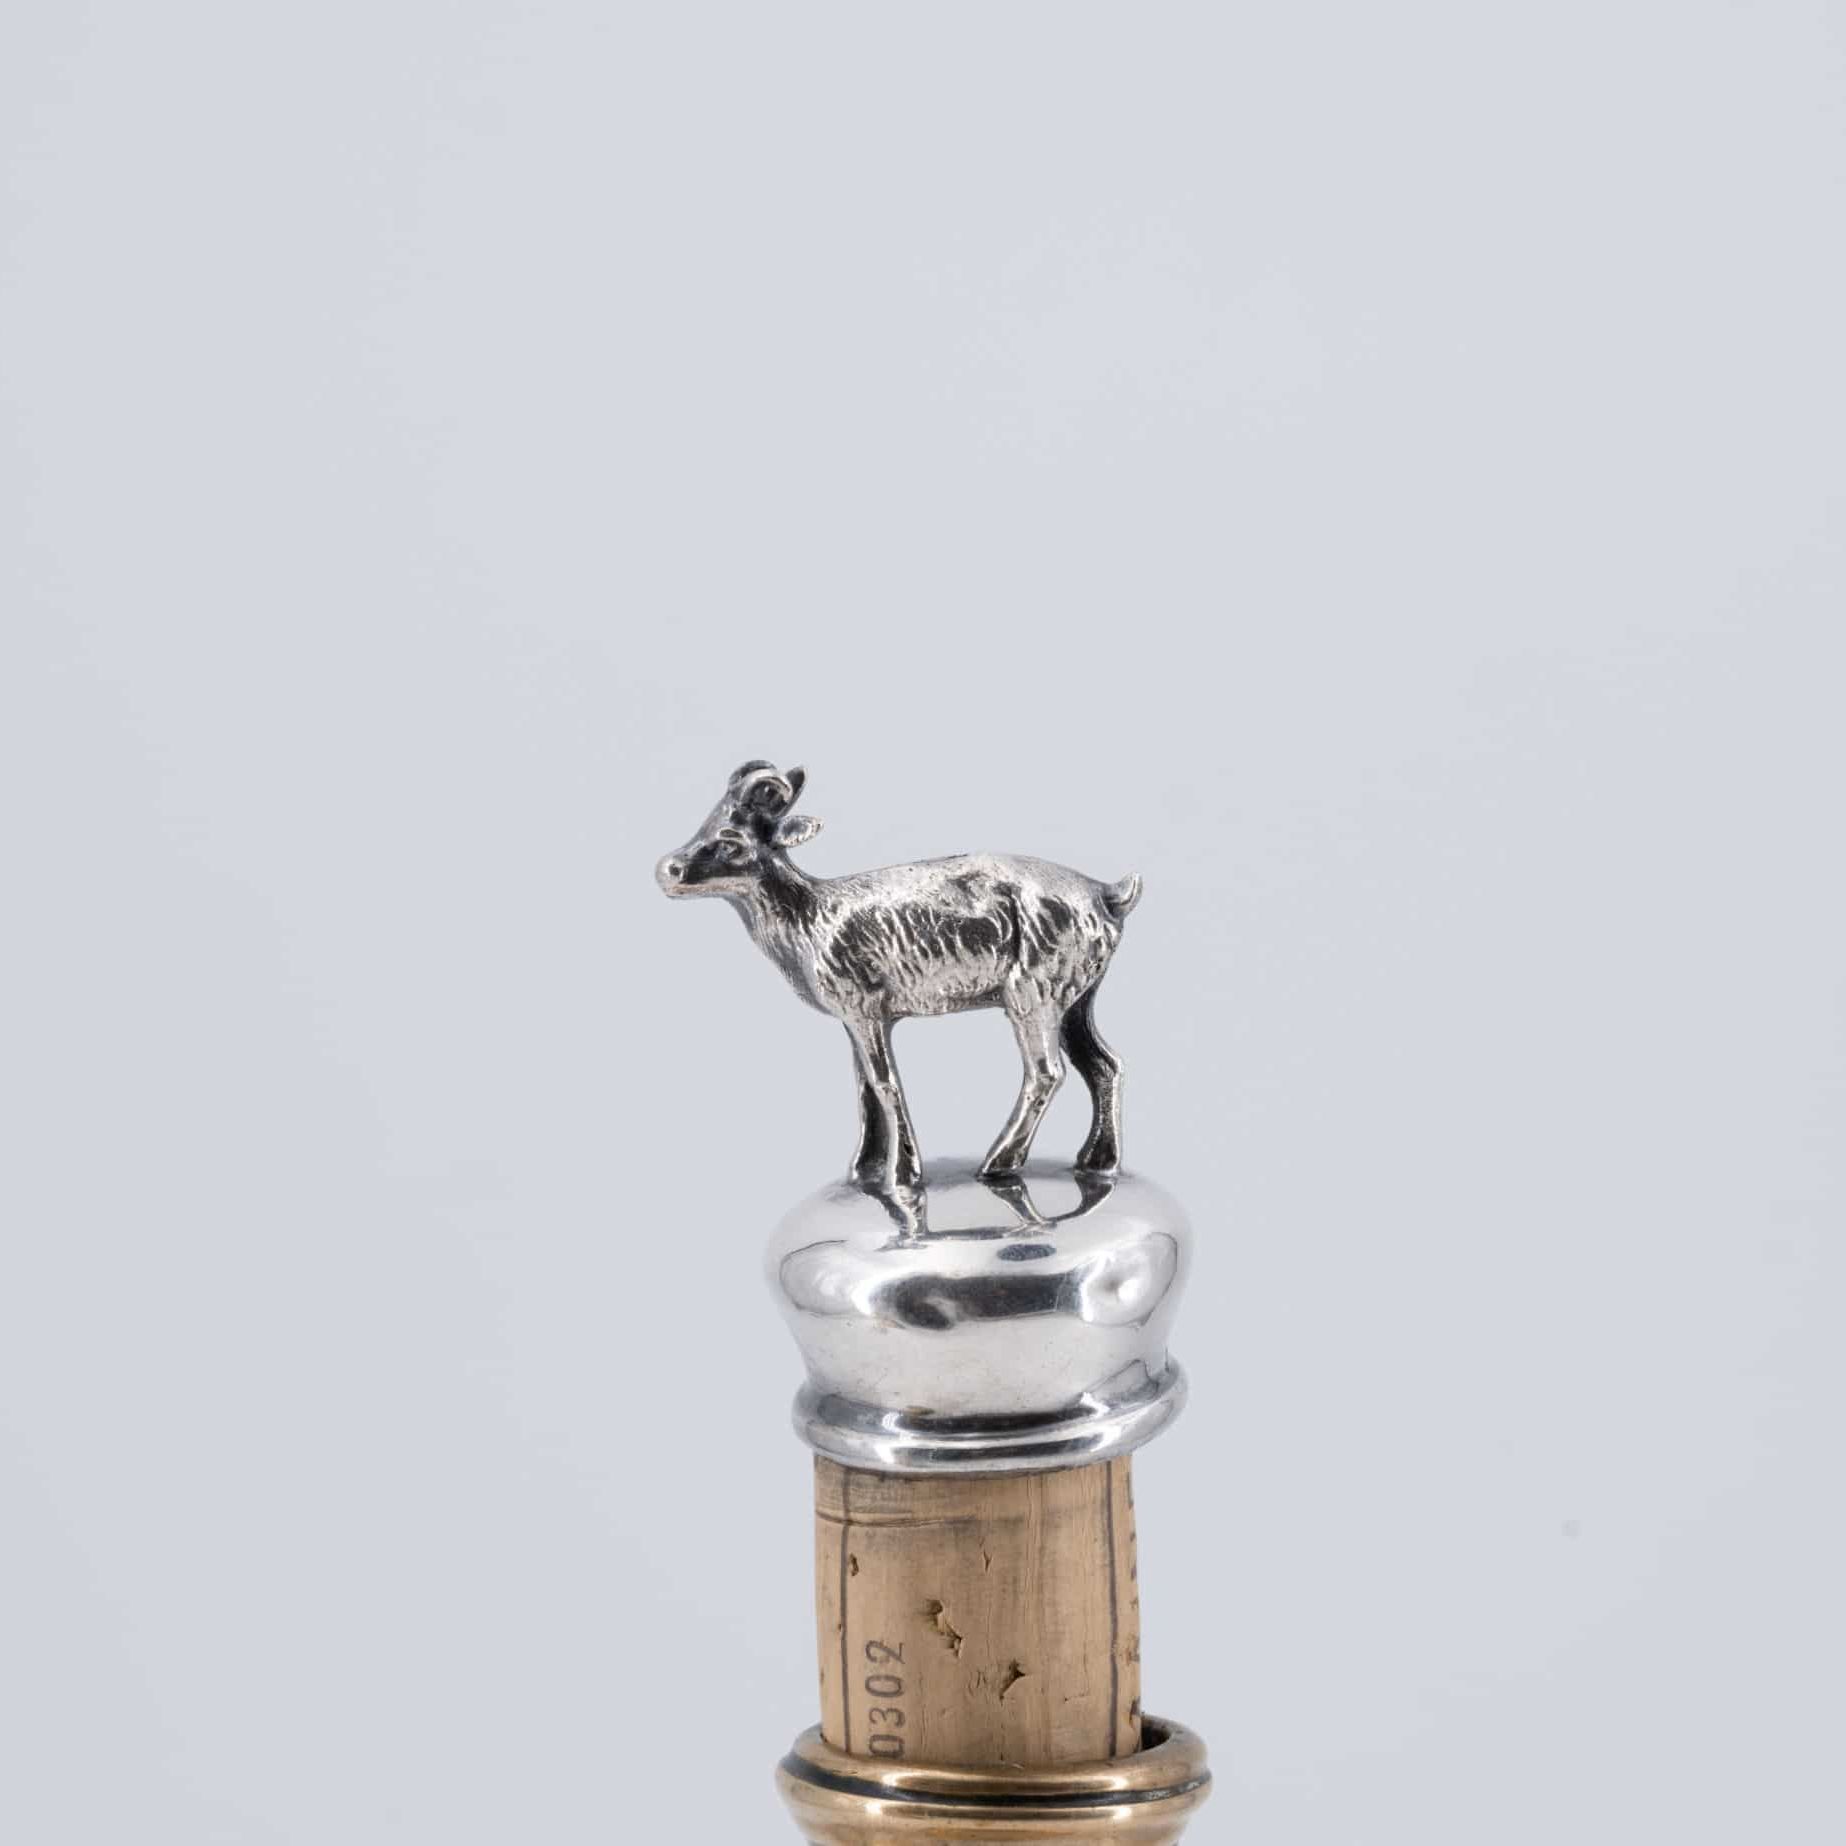 Solid silver ornate bottle stopper, 19th century